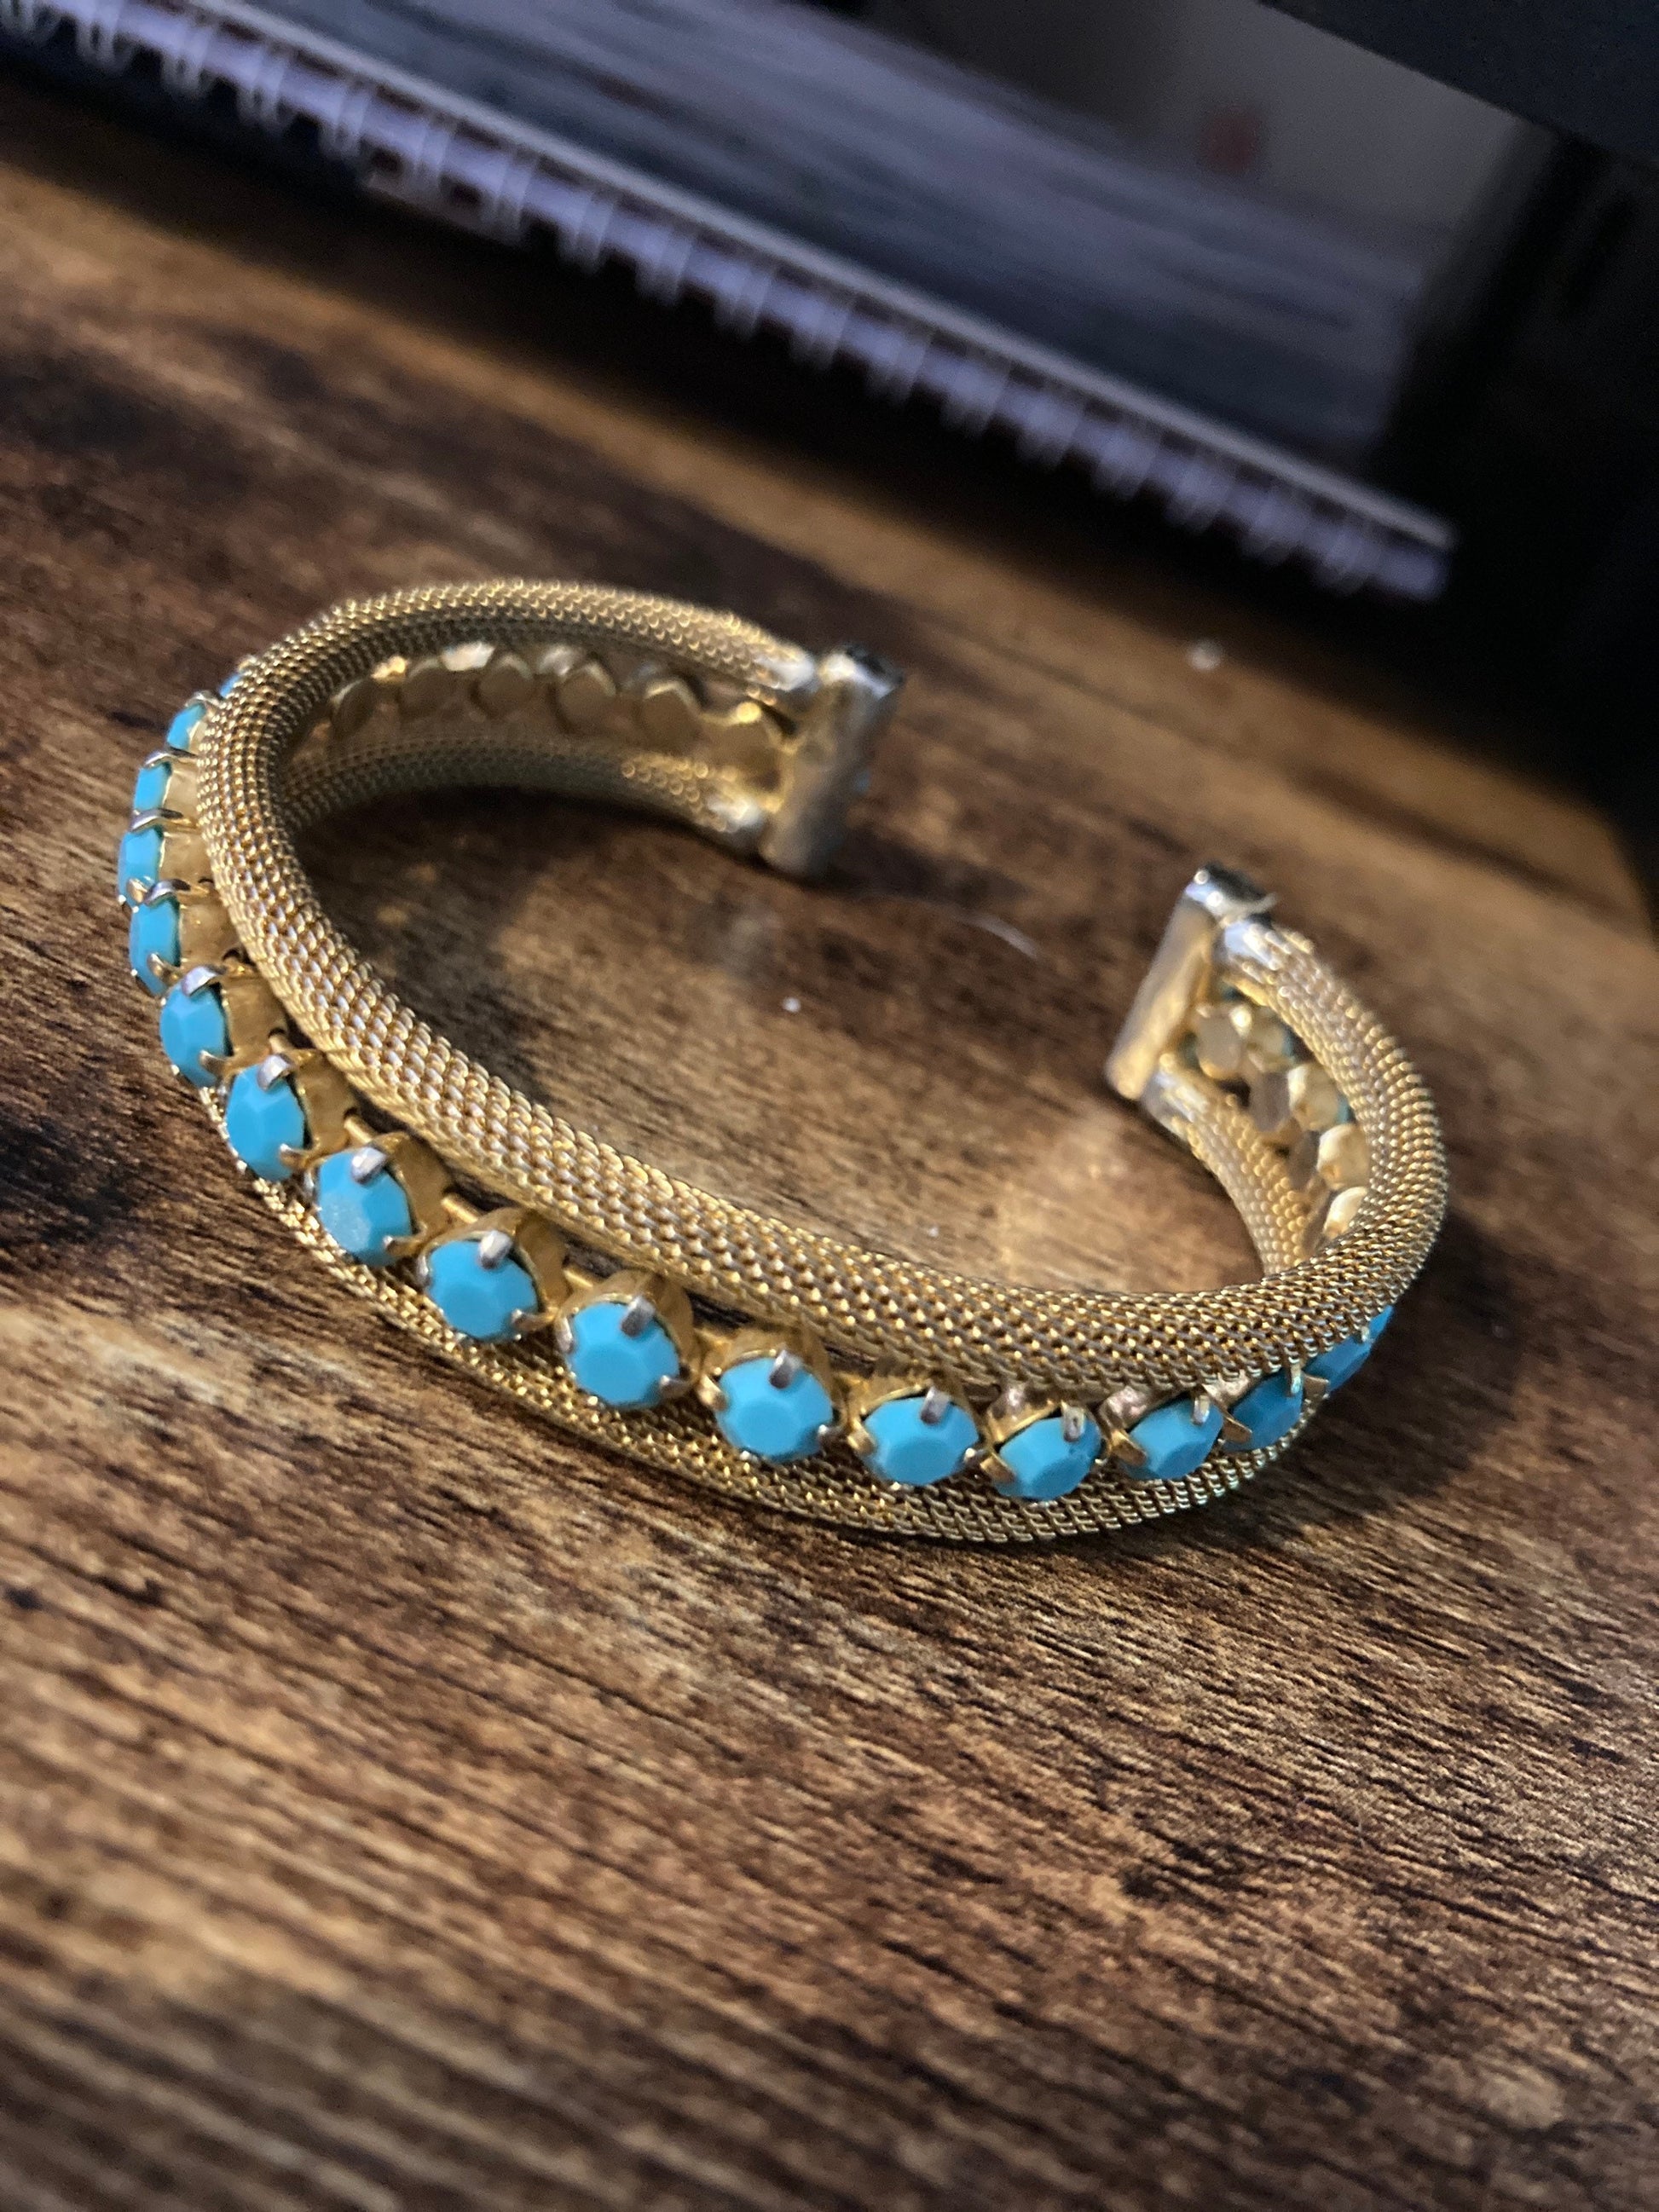 Vintage open ended adjustable fixed flat link textured gold tone gilt cuff bracelet with turquoise blue paste